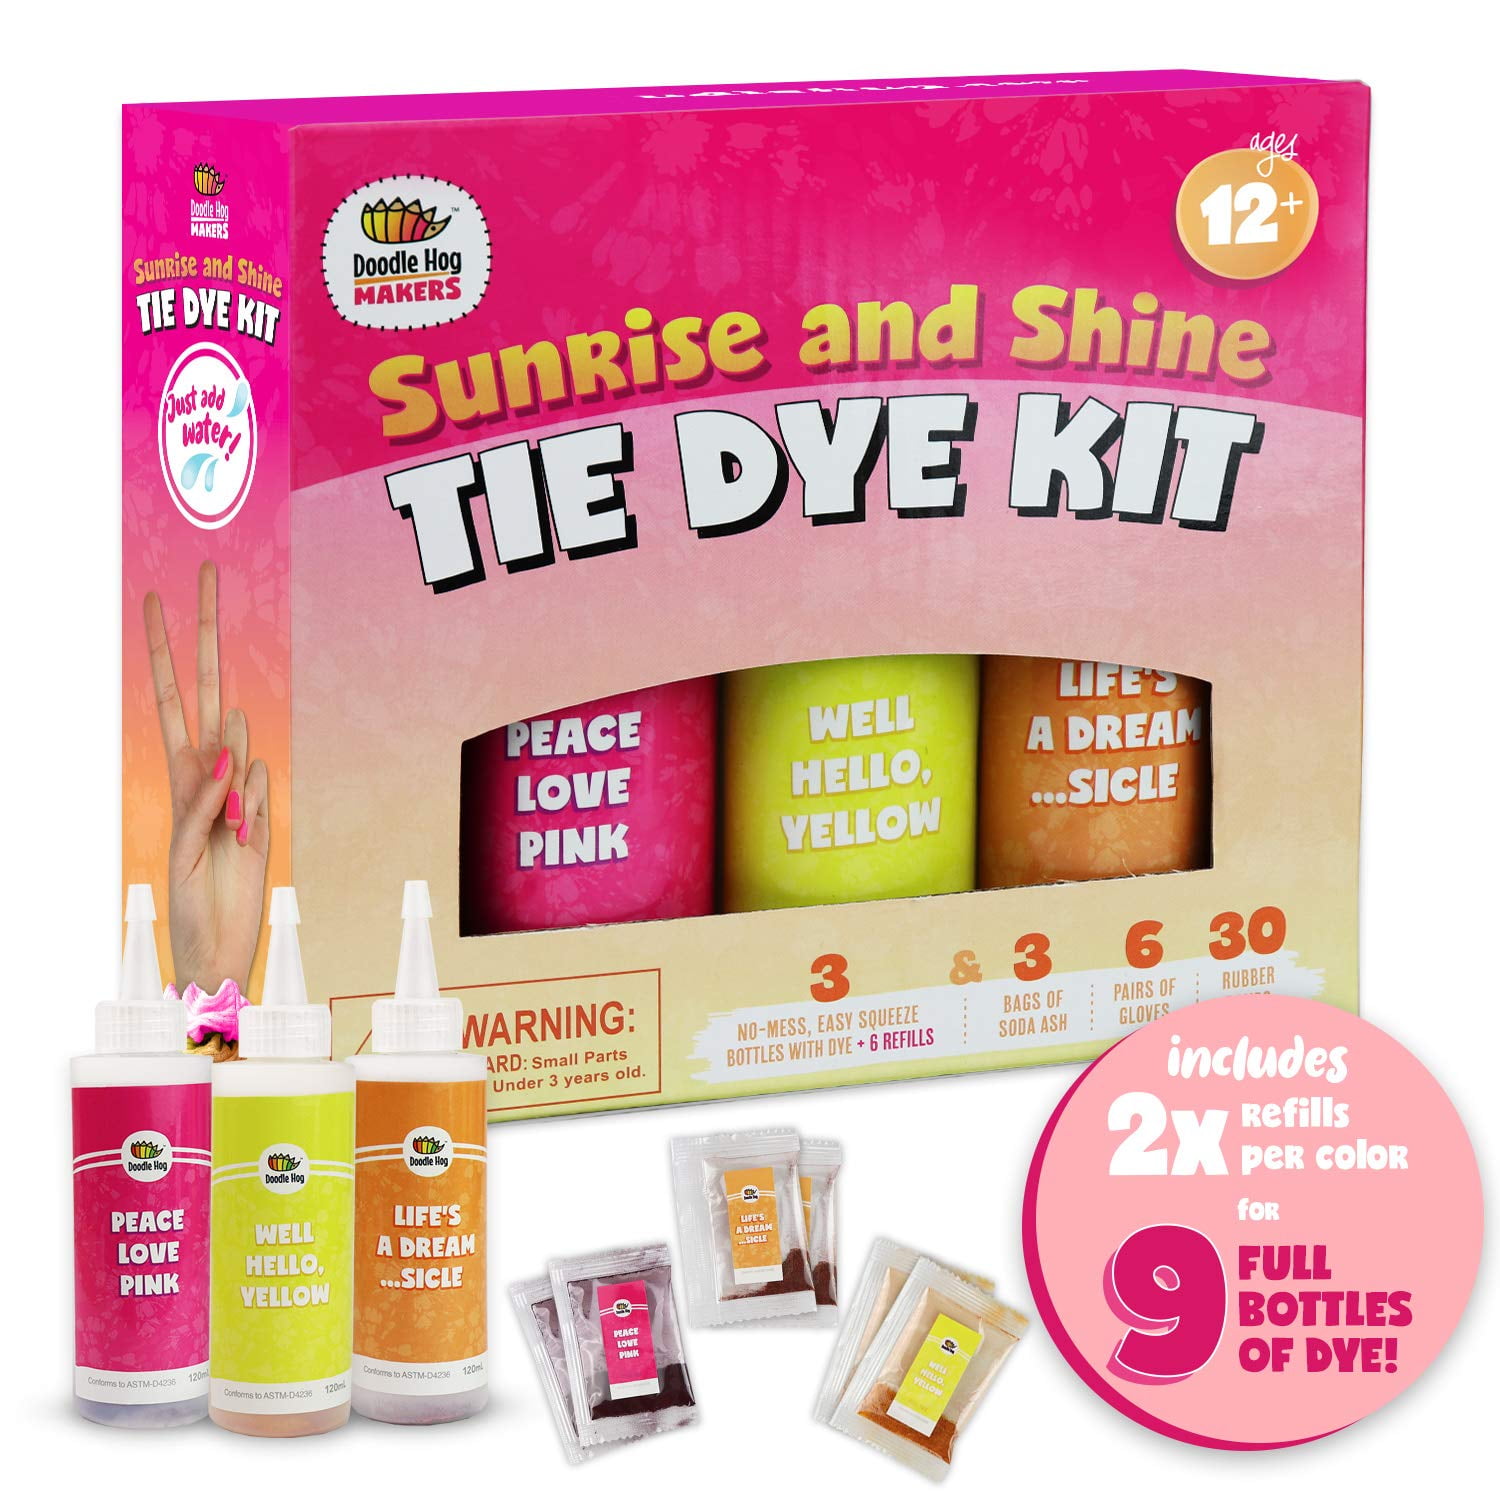 REFILL Great Big Tie Dye Kit 6 Dye Colours Real Fabric Dyes Make 10 T-shirts  or up to 30 Kids Items Same Day Postage 